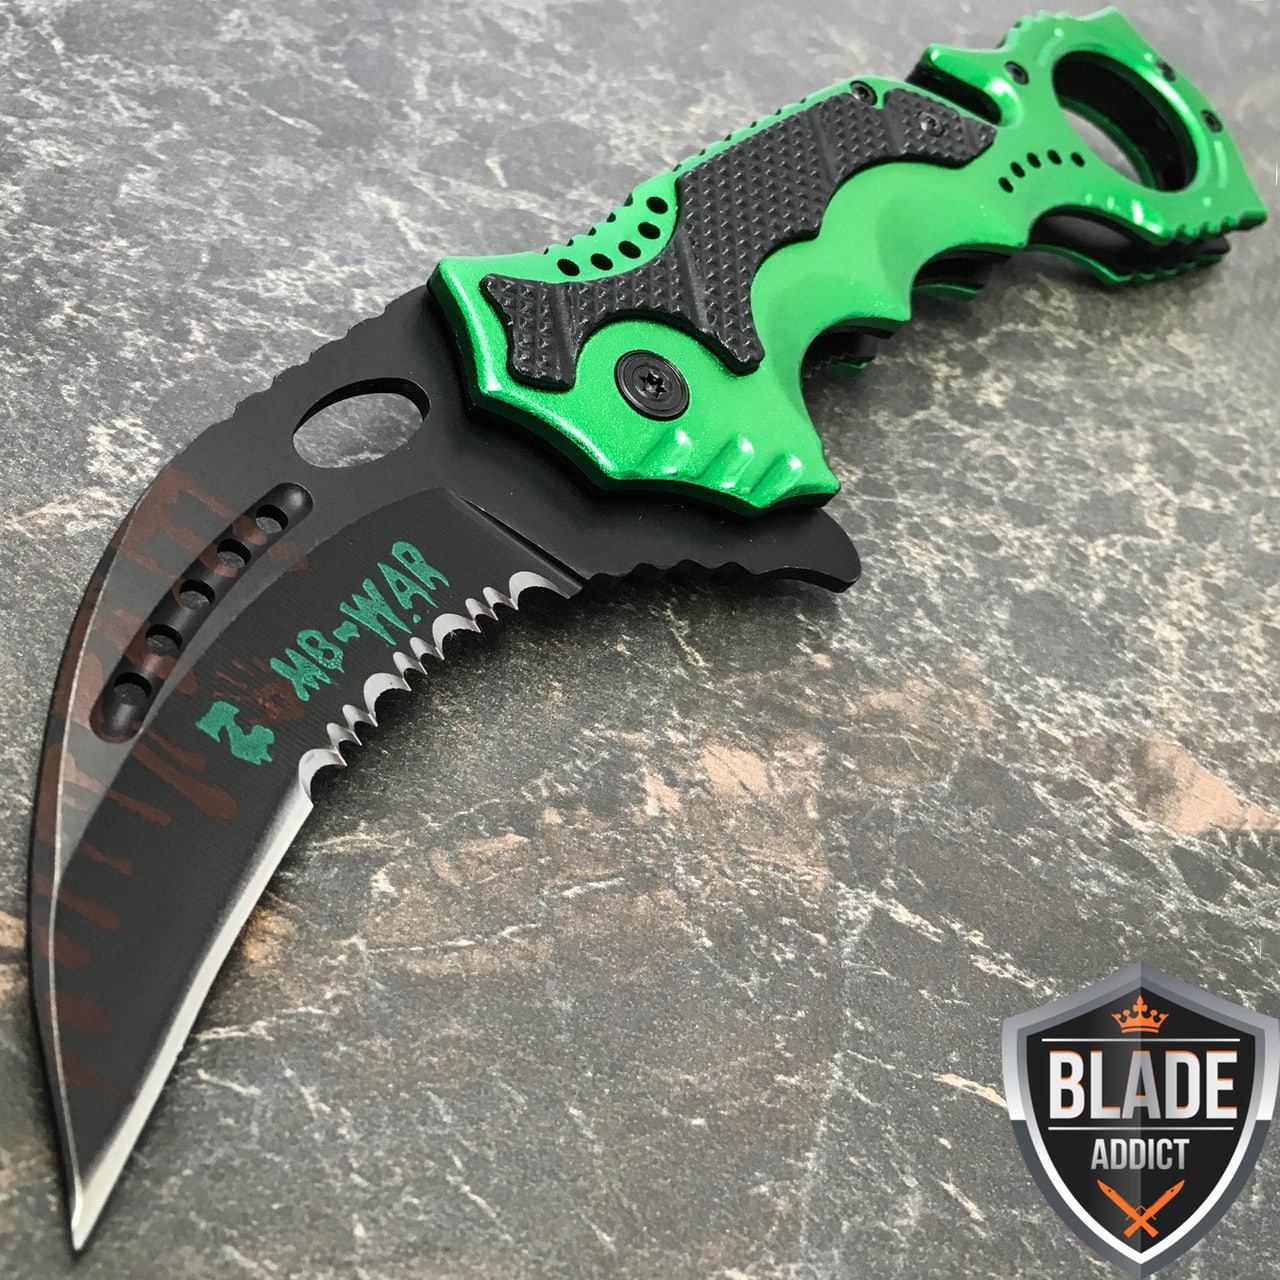 8″ ZOMBIE KARAMBIT Tactical Claw Spring Assisted Pocket Knife Rescue Combat EDC